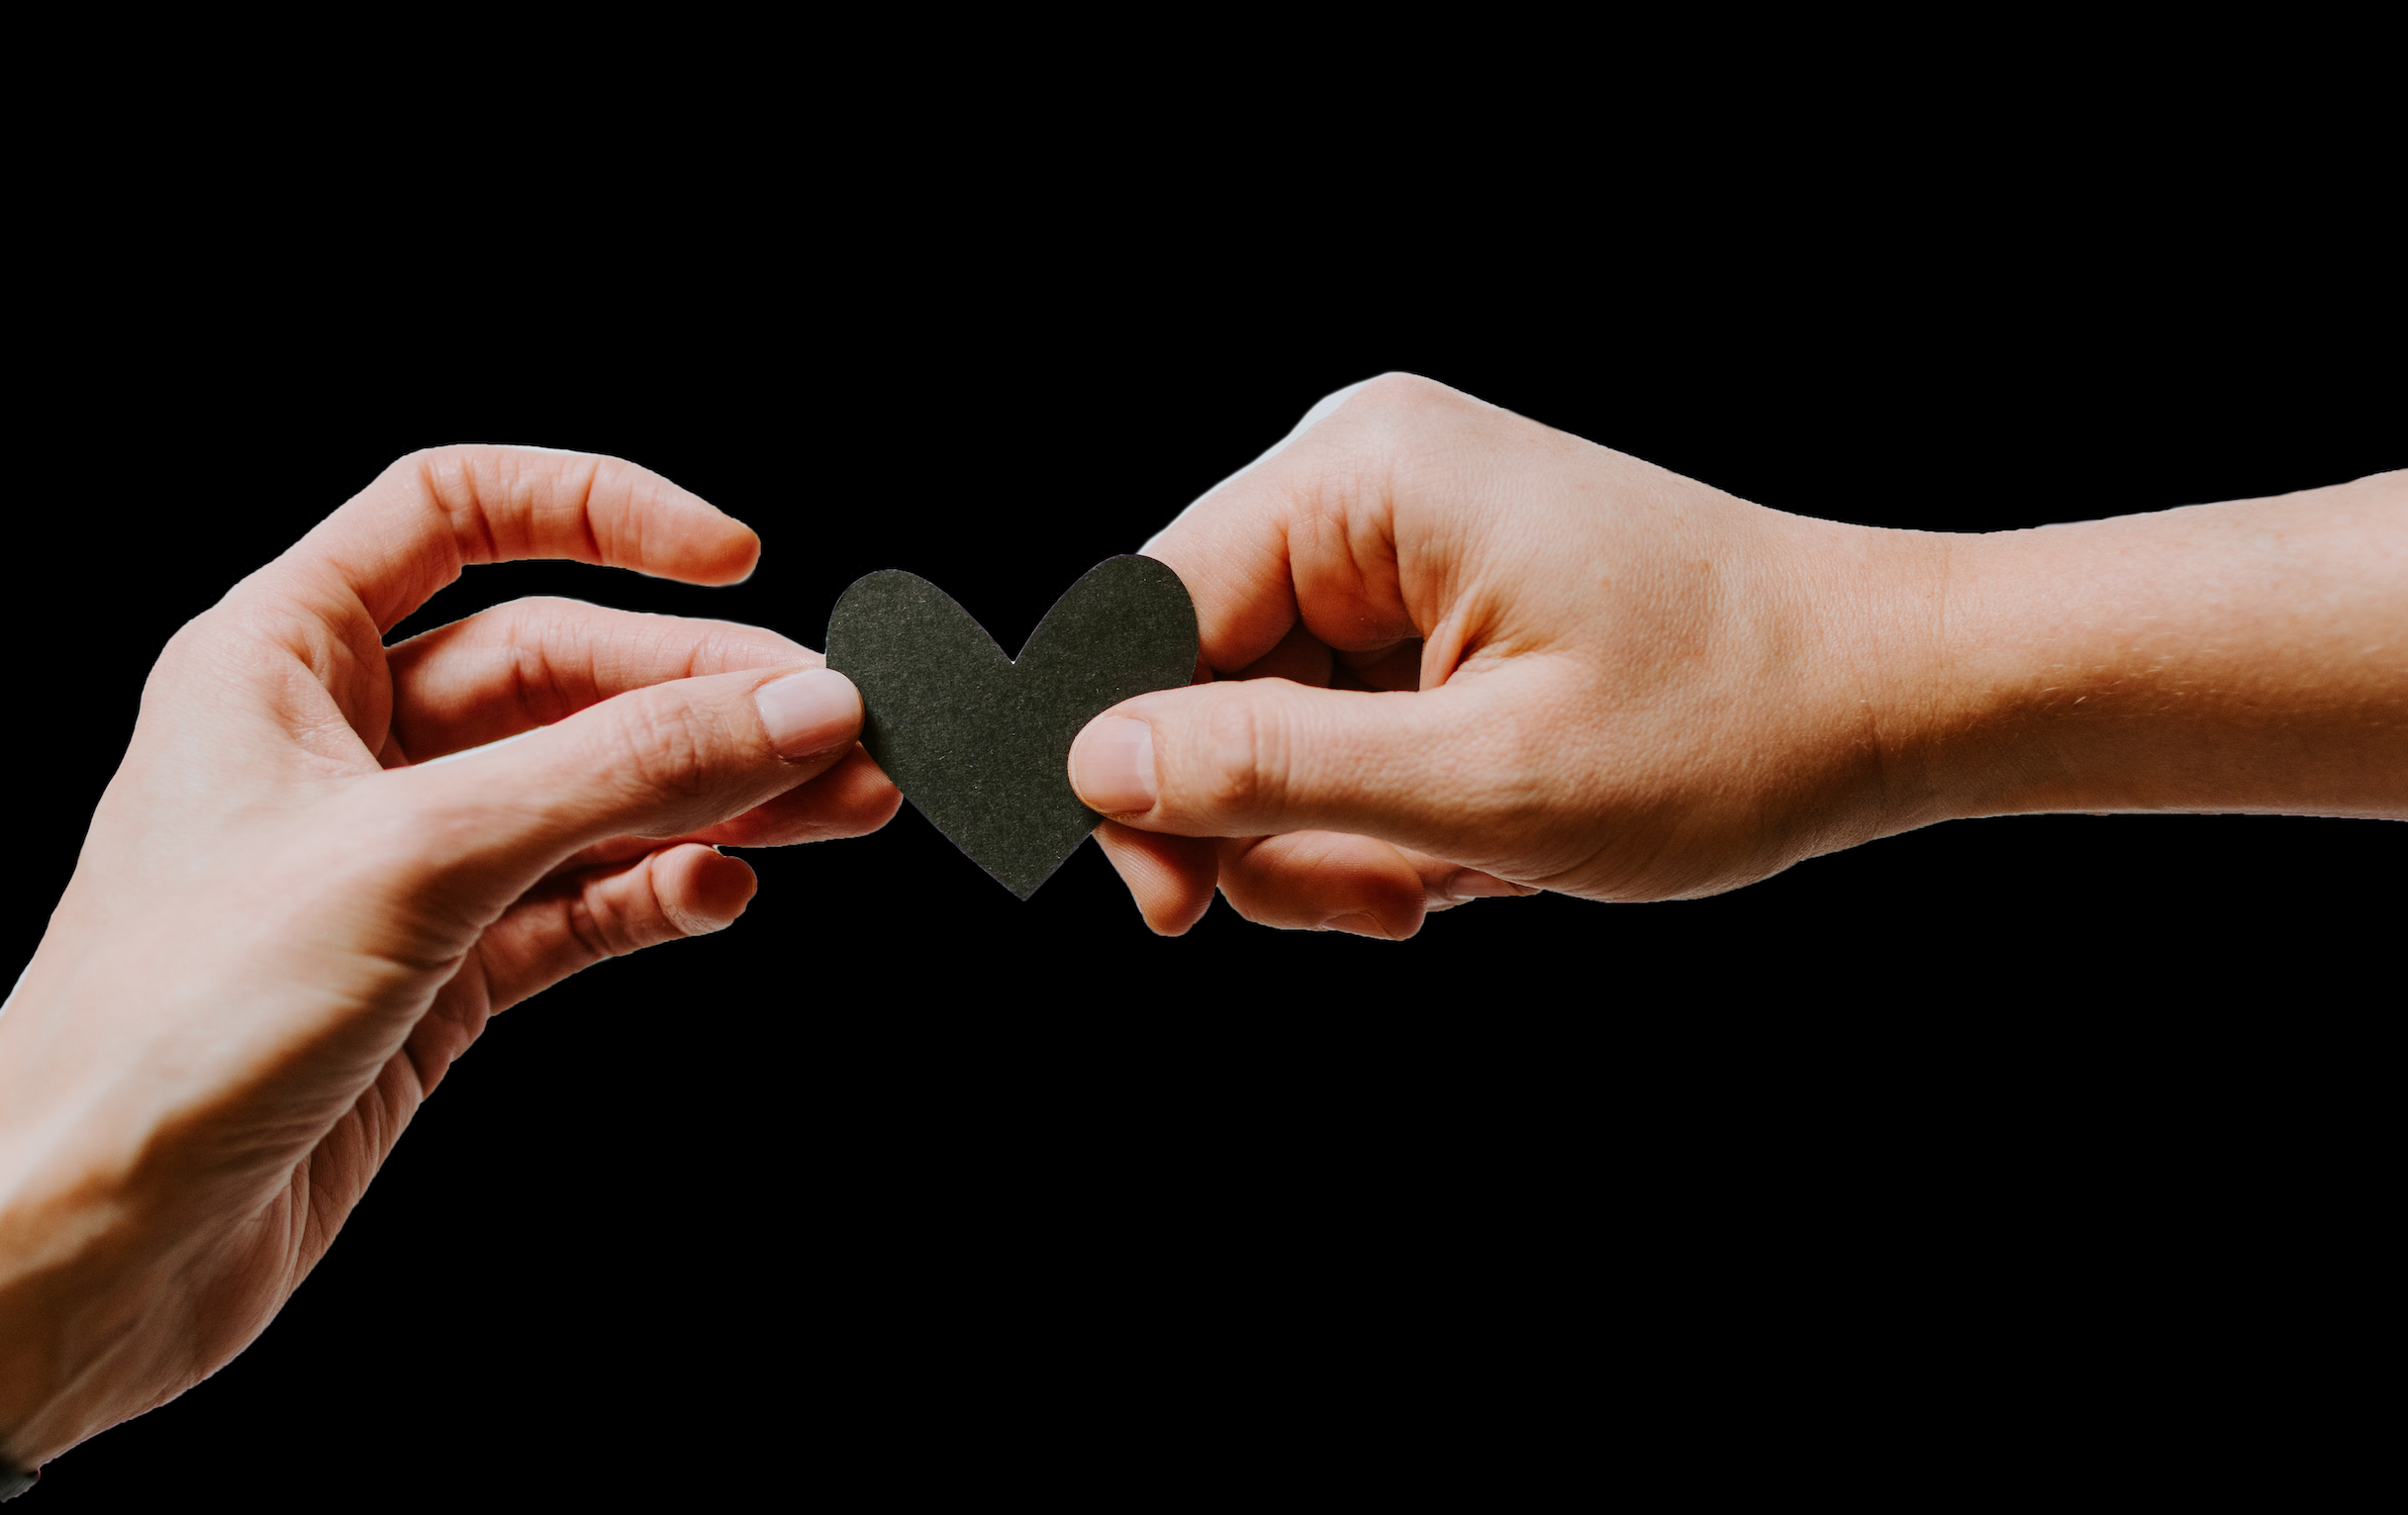 Two hands pass a black paper heart between each other